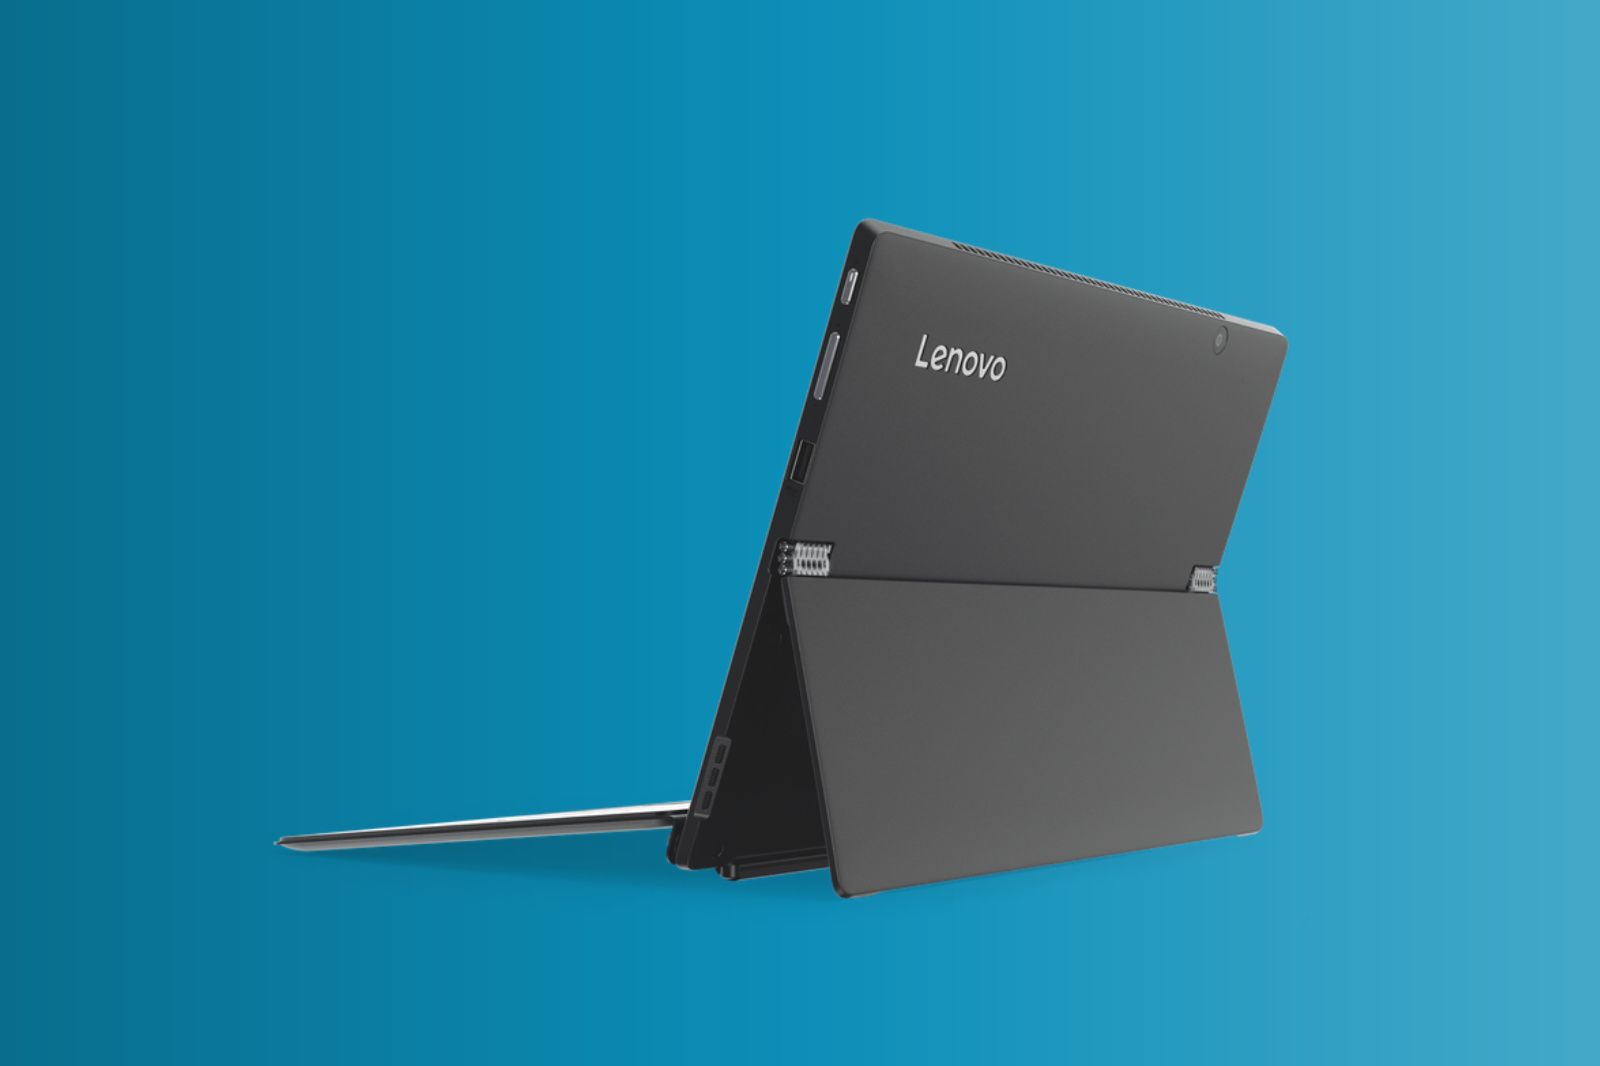 lenovo s new miix 720 2 in 1 is a true surface pro 4 competitor image 4